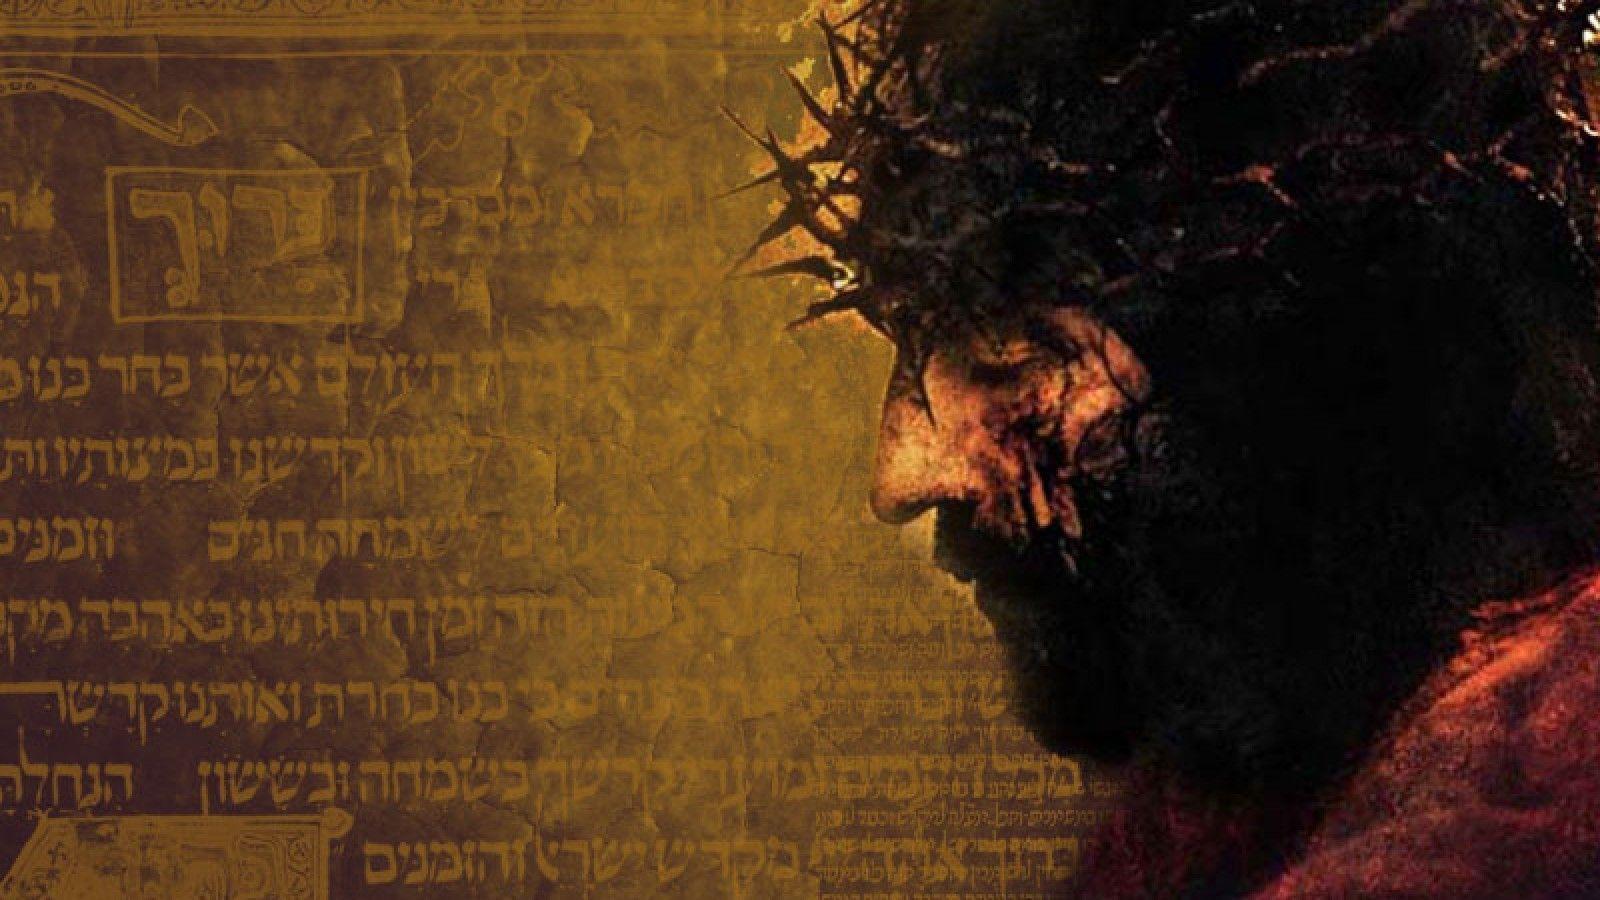 Wallpapers Of Christ - Wallpaper Cave